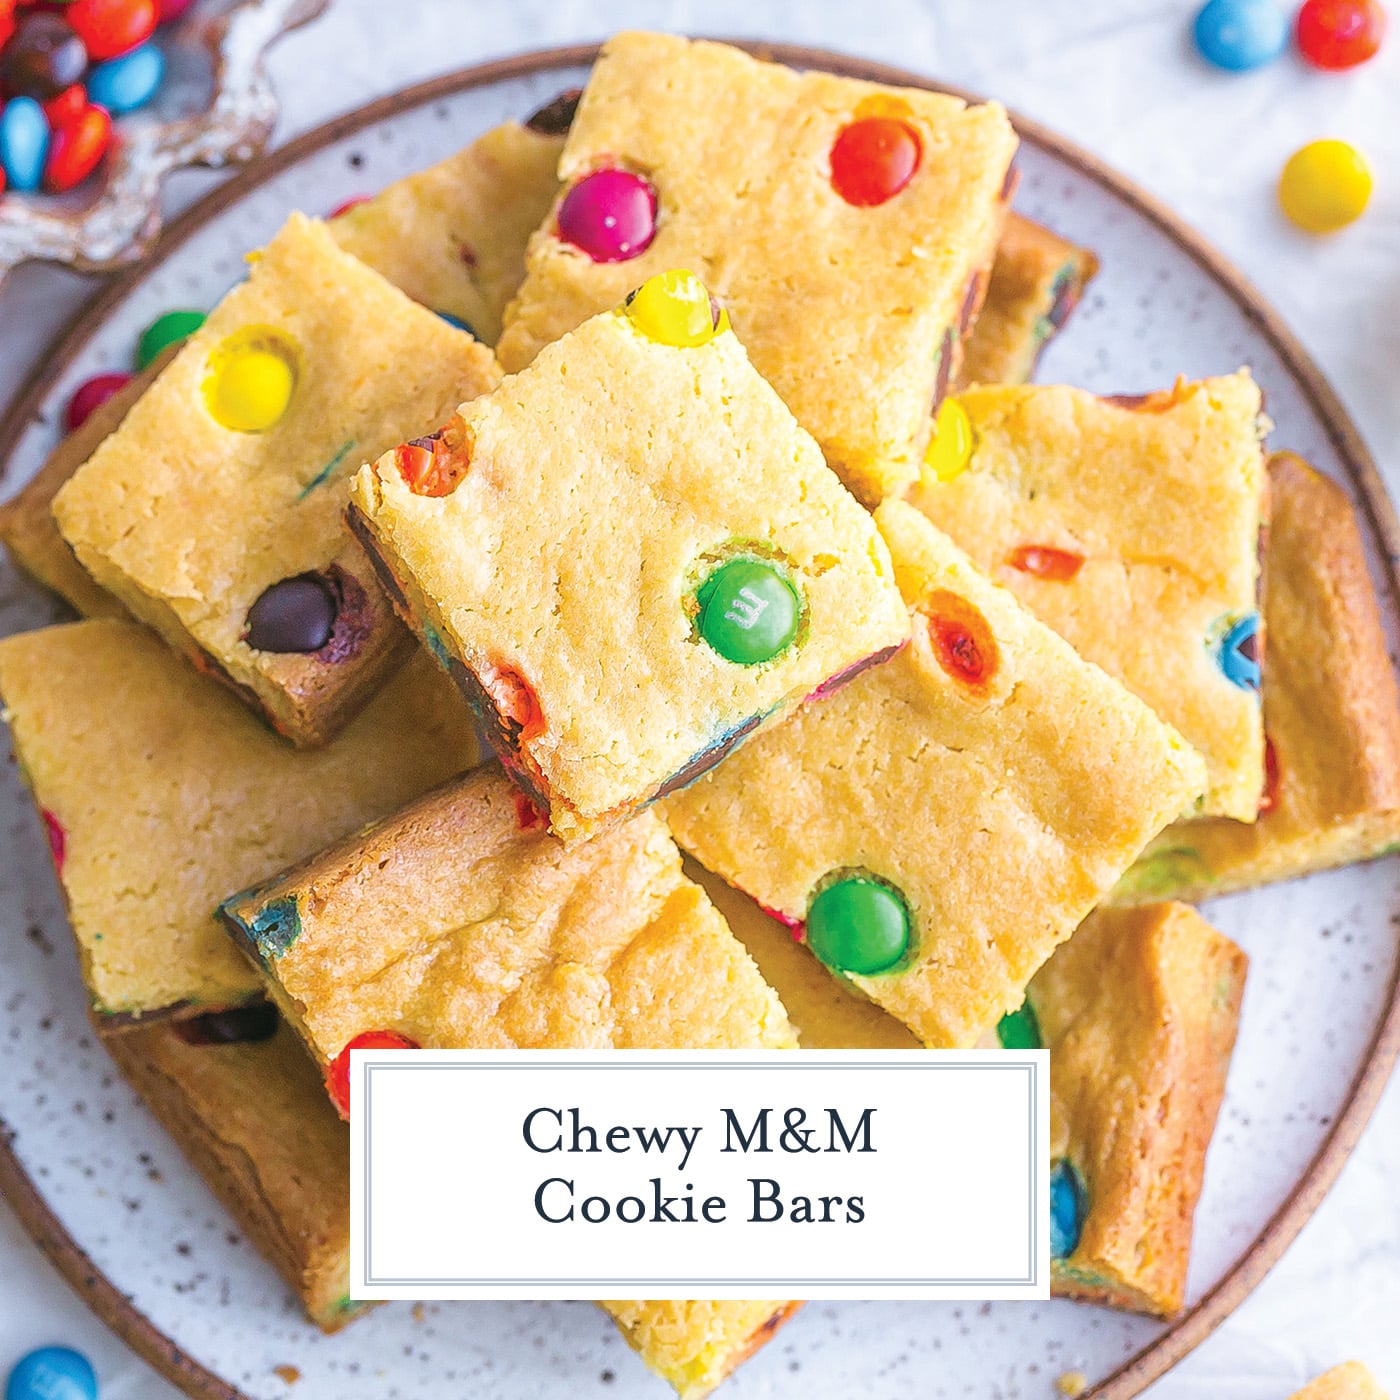 M&M's® Kid's Birthday Party - Daily Party Dish